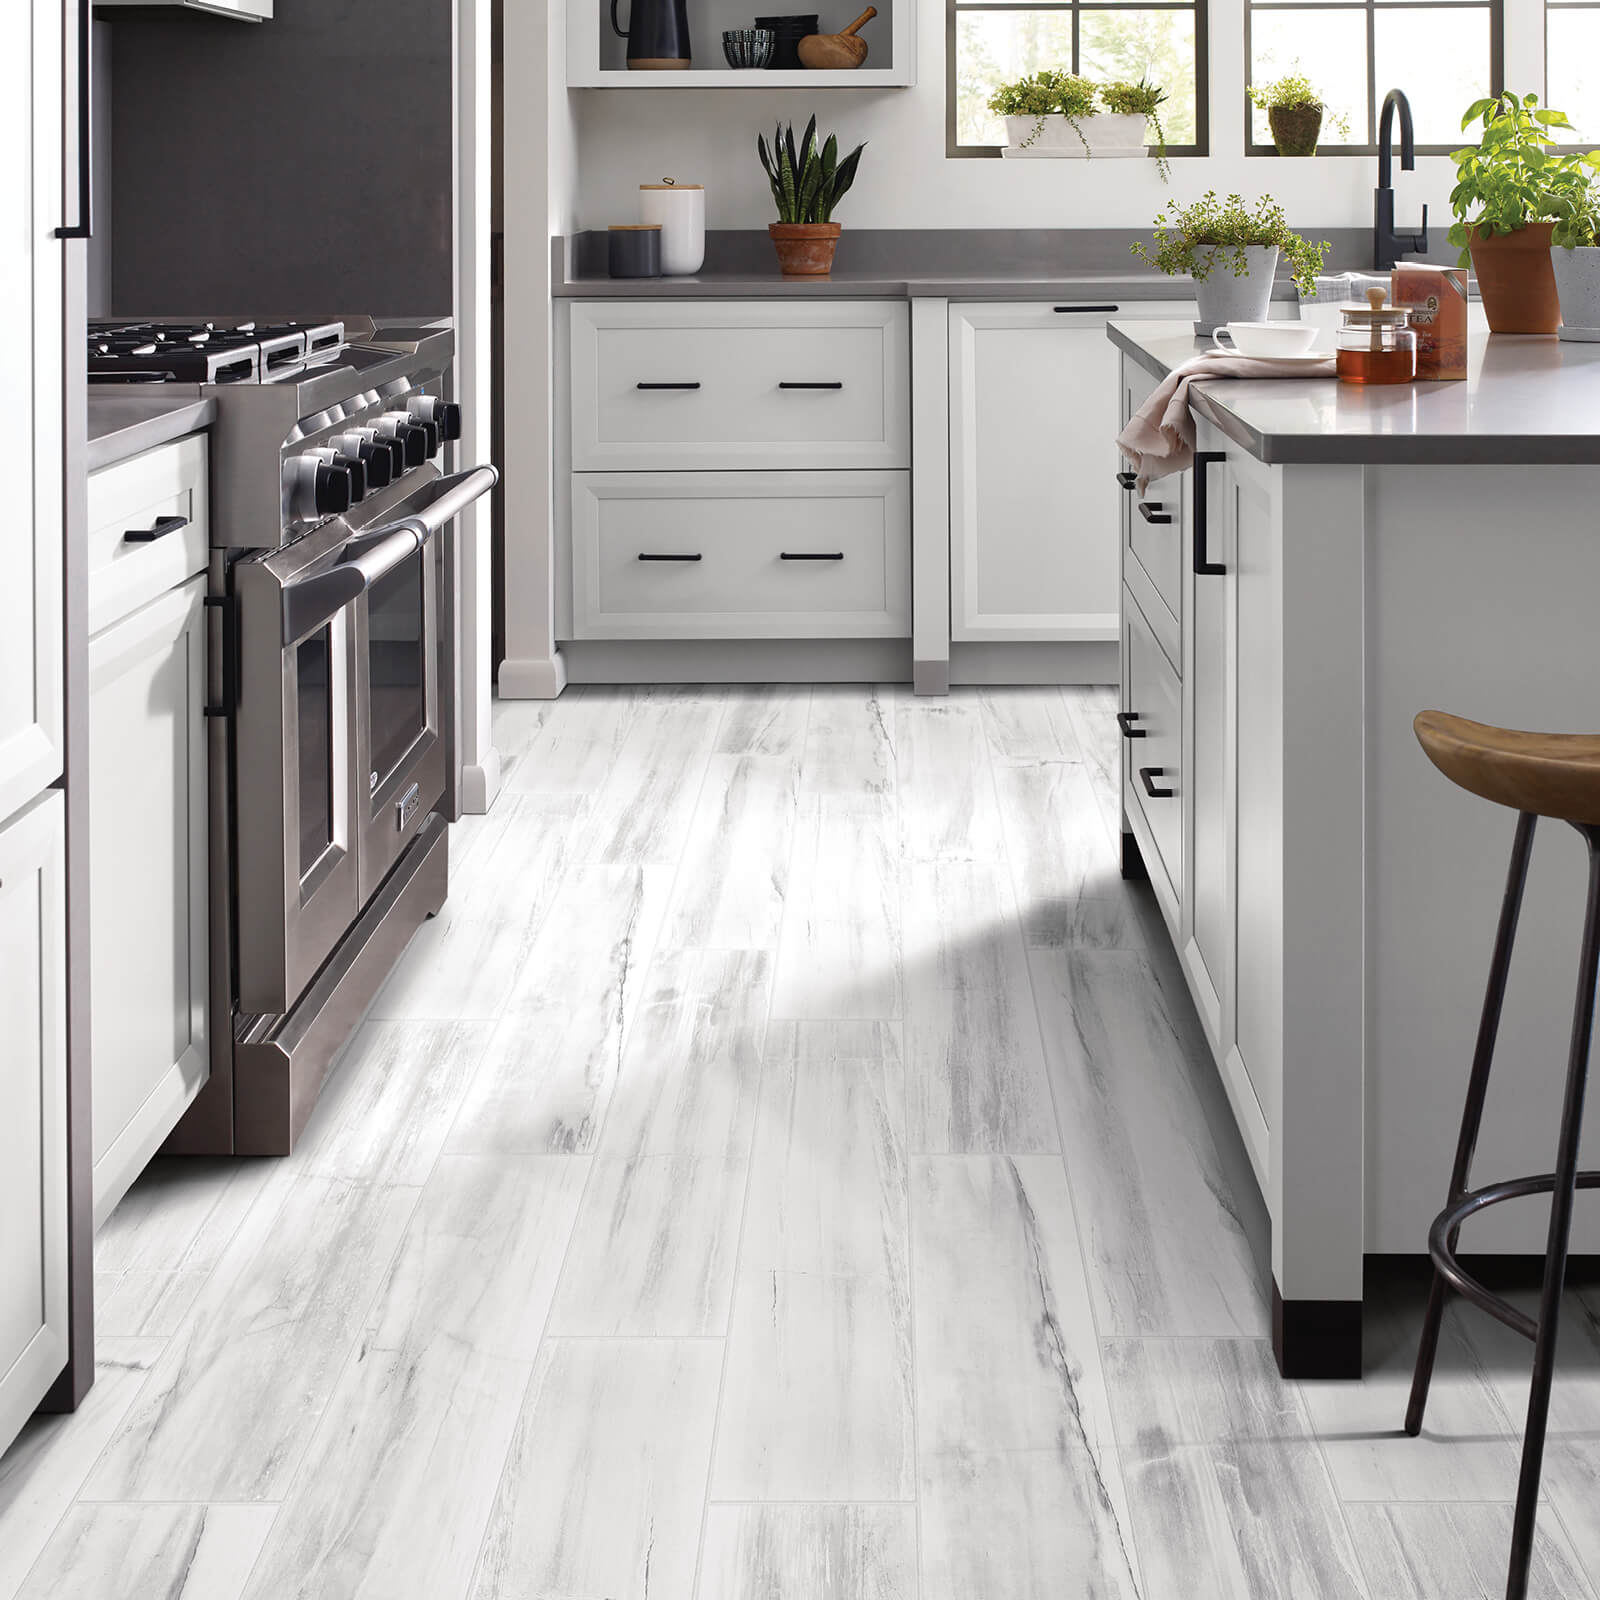 Kitchen cabinets | Affordable Floors